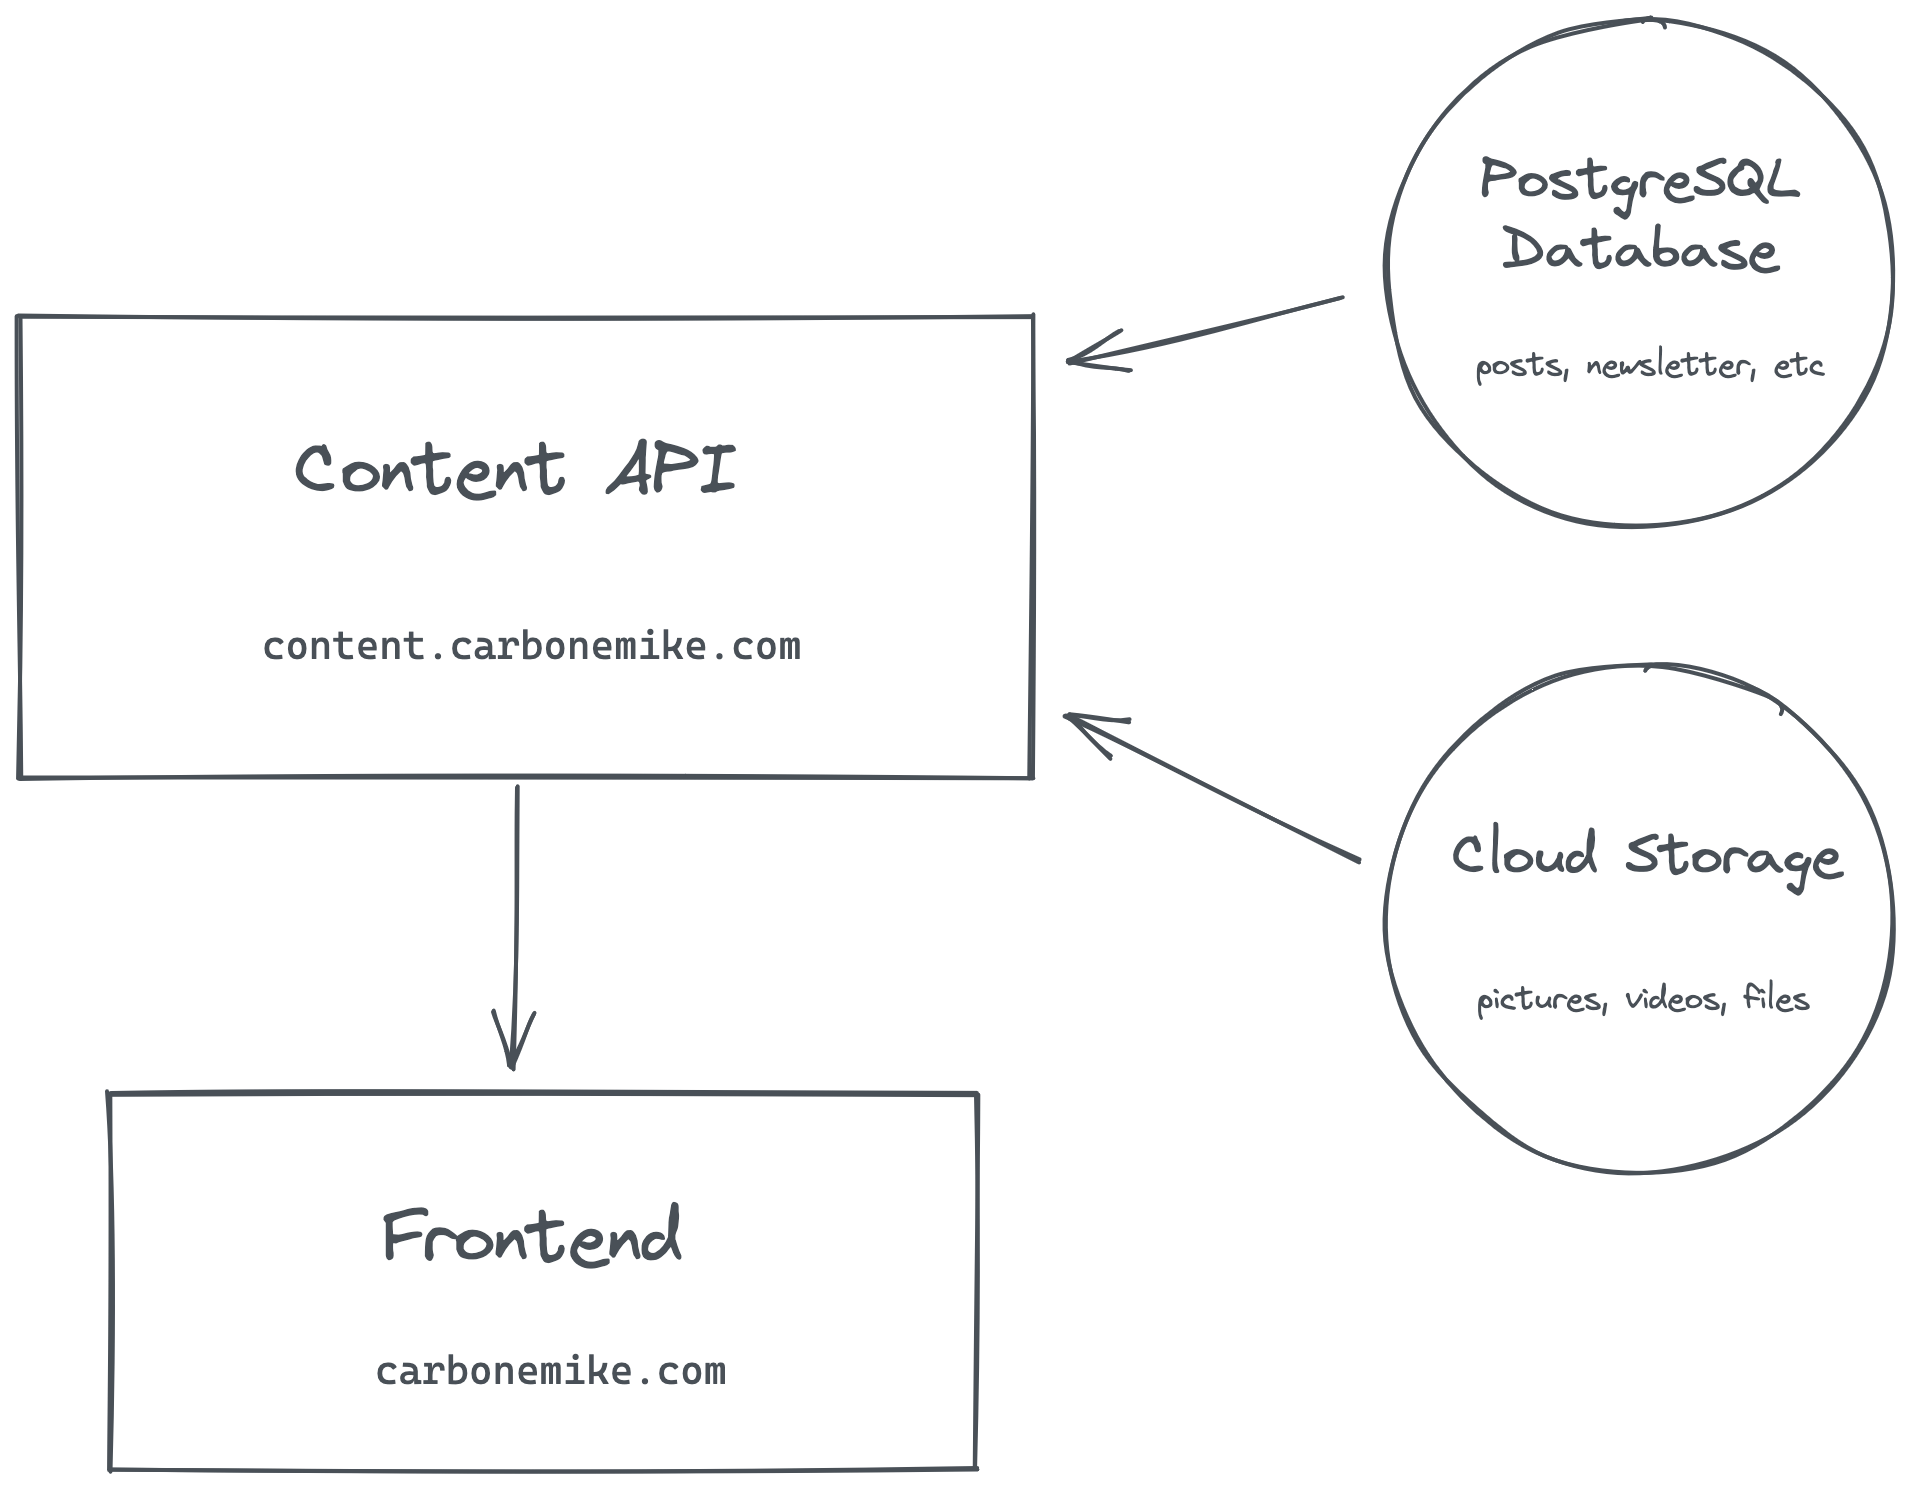 A flowchart showing a frontend box connected to a content API, which connects to a PostgreSQL database with one arrow, and a Cloud Storage with another arrow